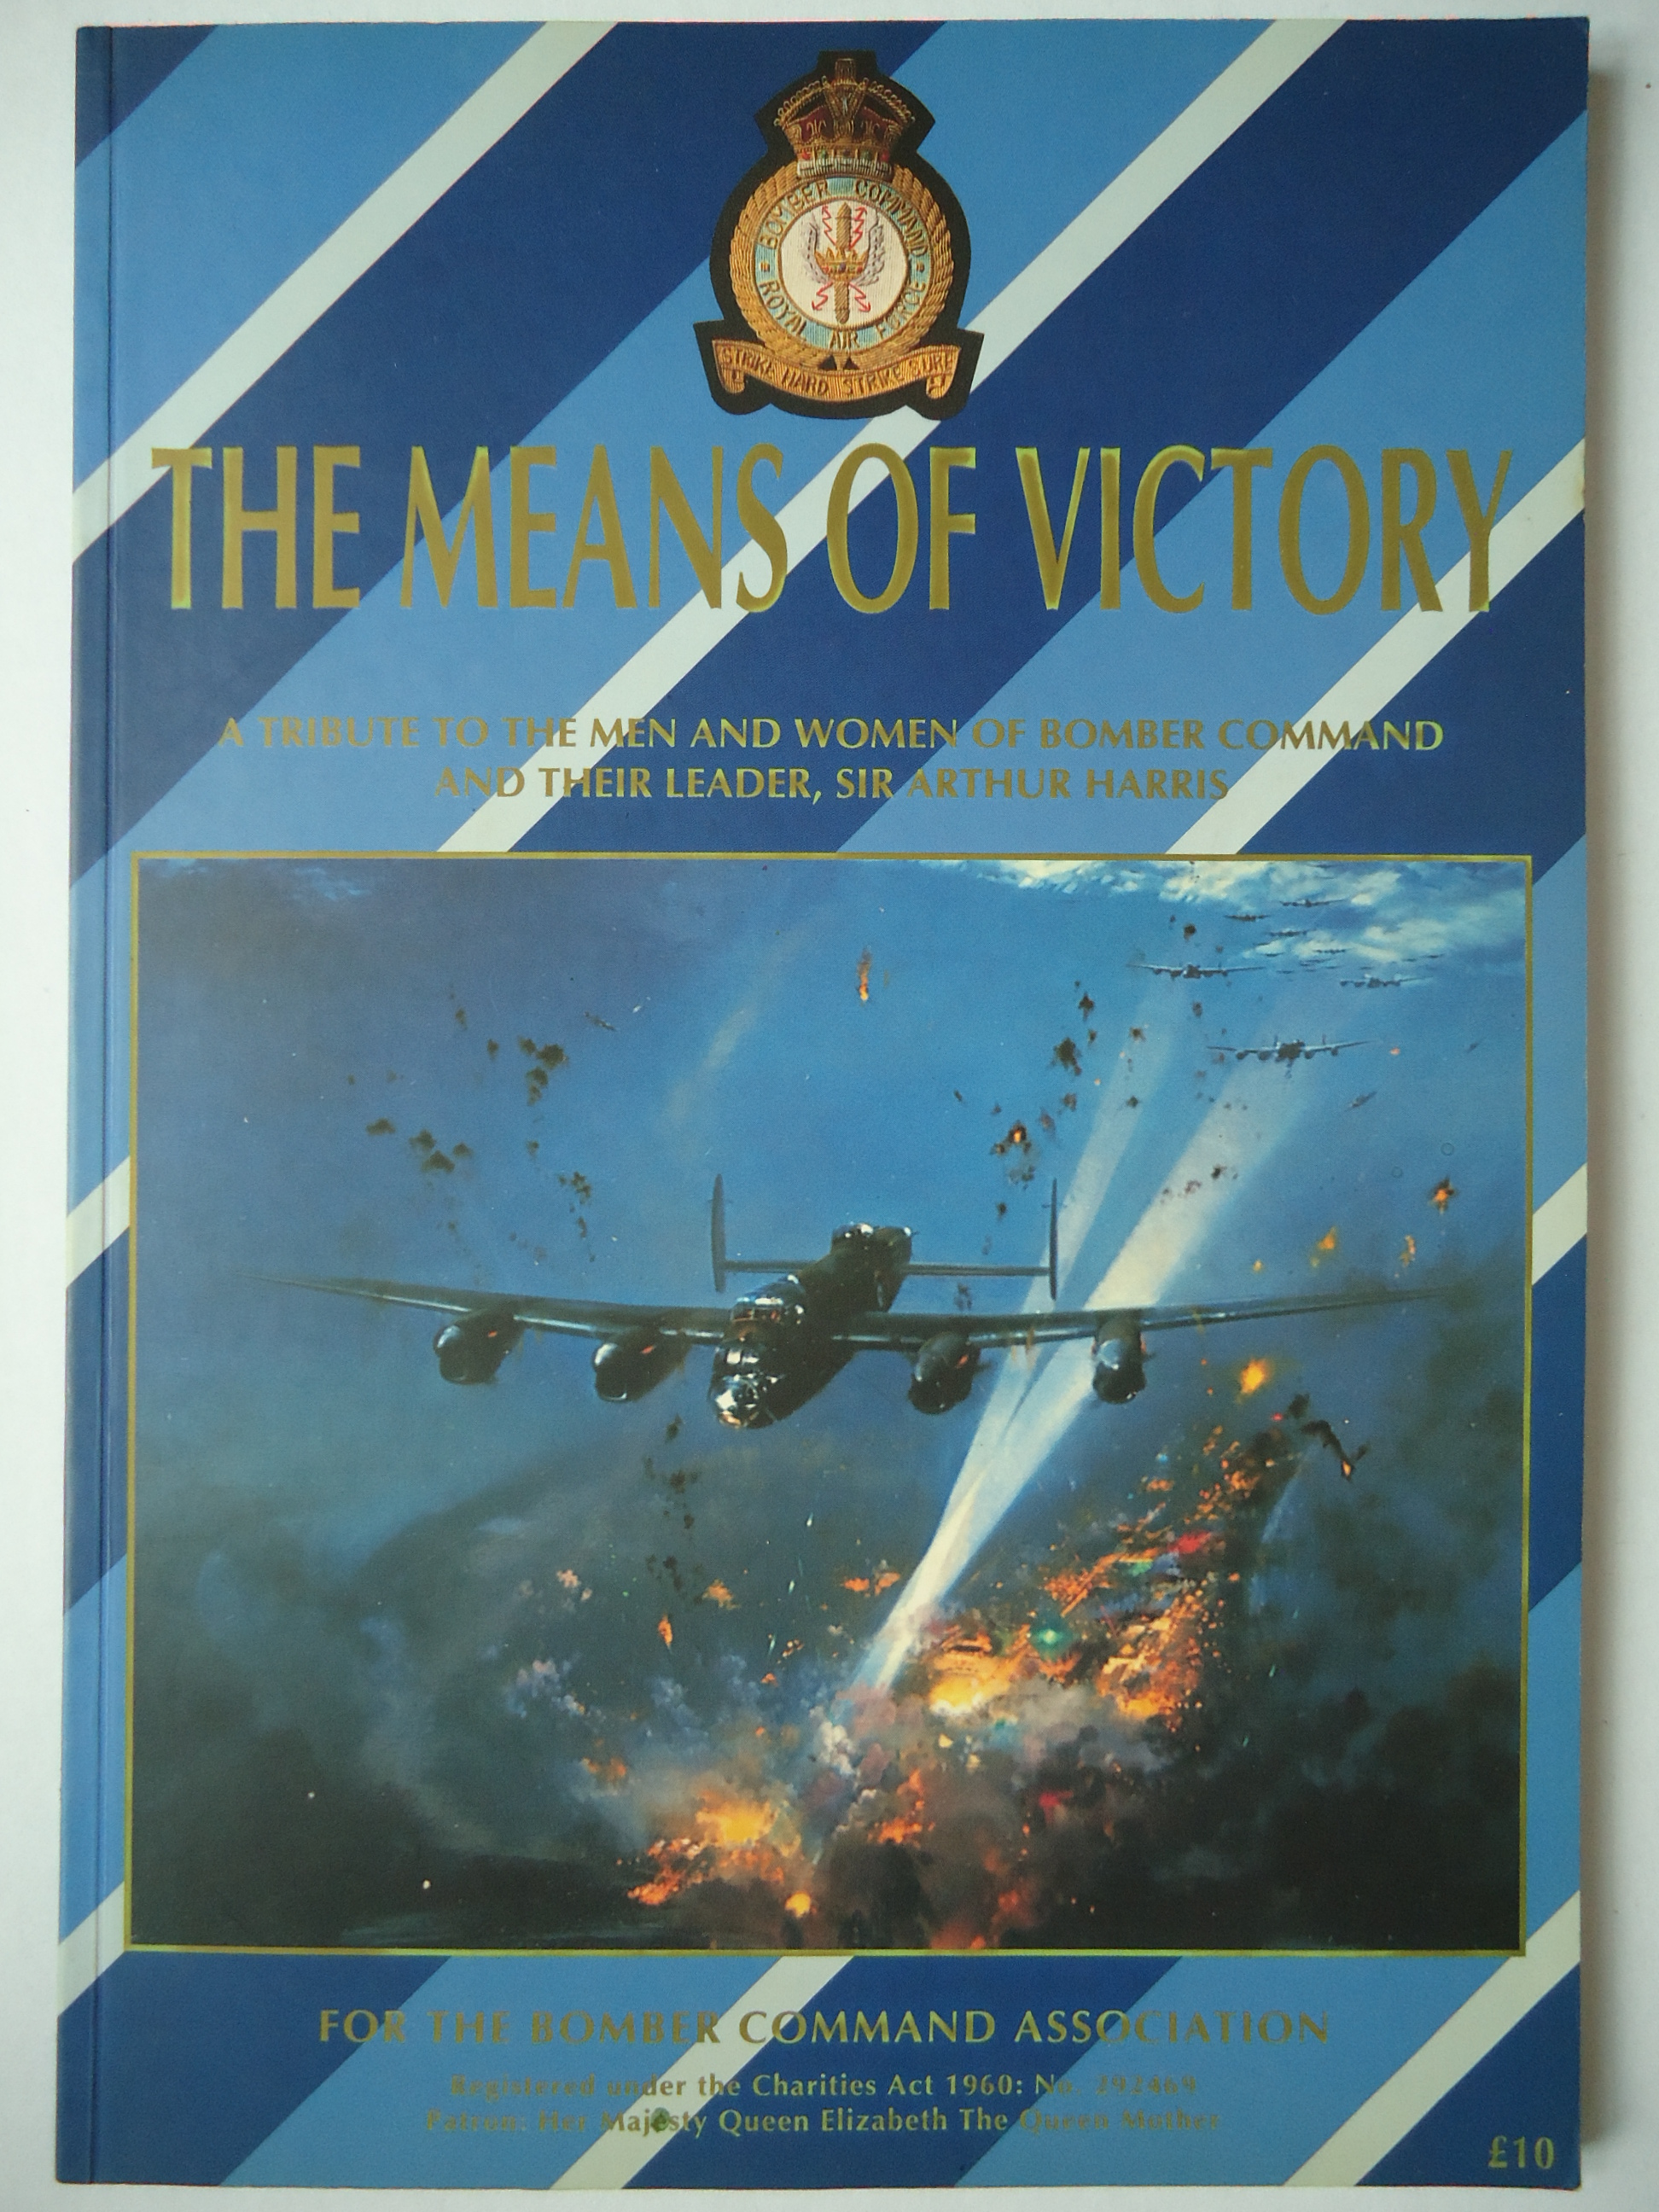 THE MEANS OF VICTORY. A Tribute to the Men and Women of Bomber Command and their Leader, Sir Arthur Harris - White, Stanley, (editor)